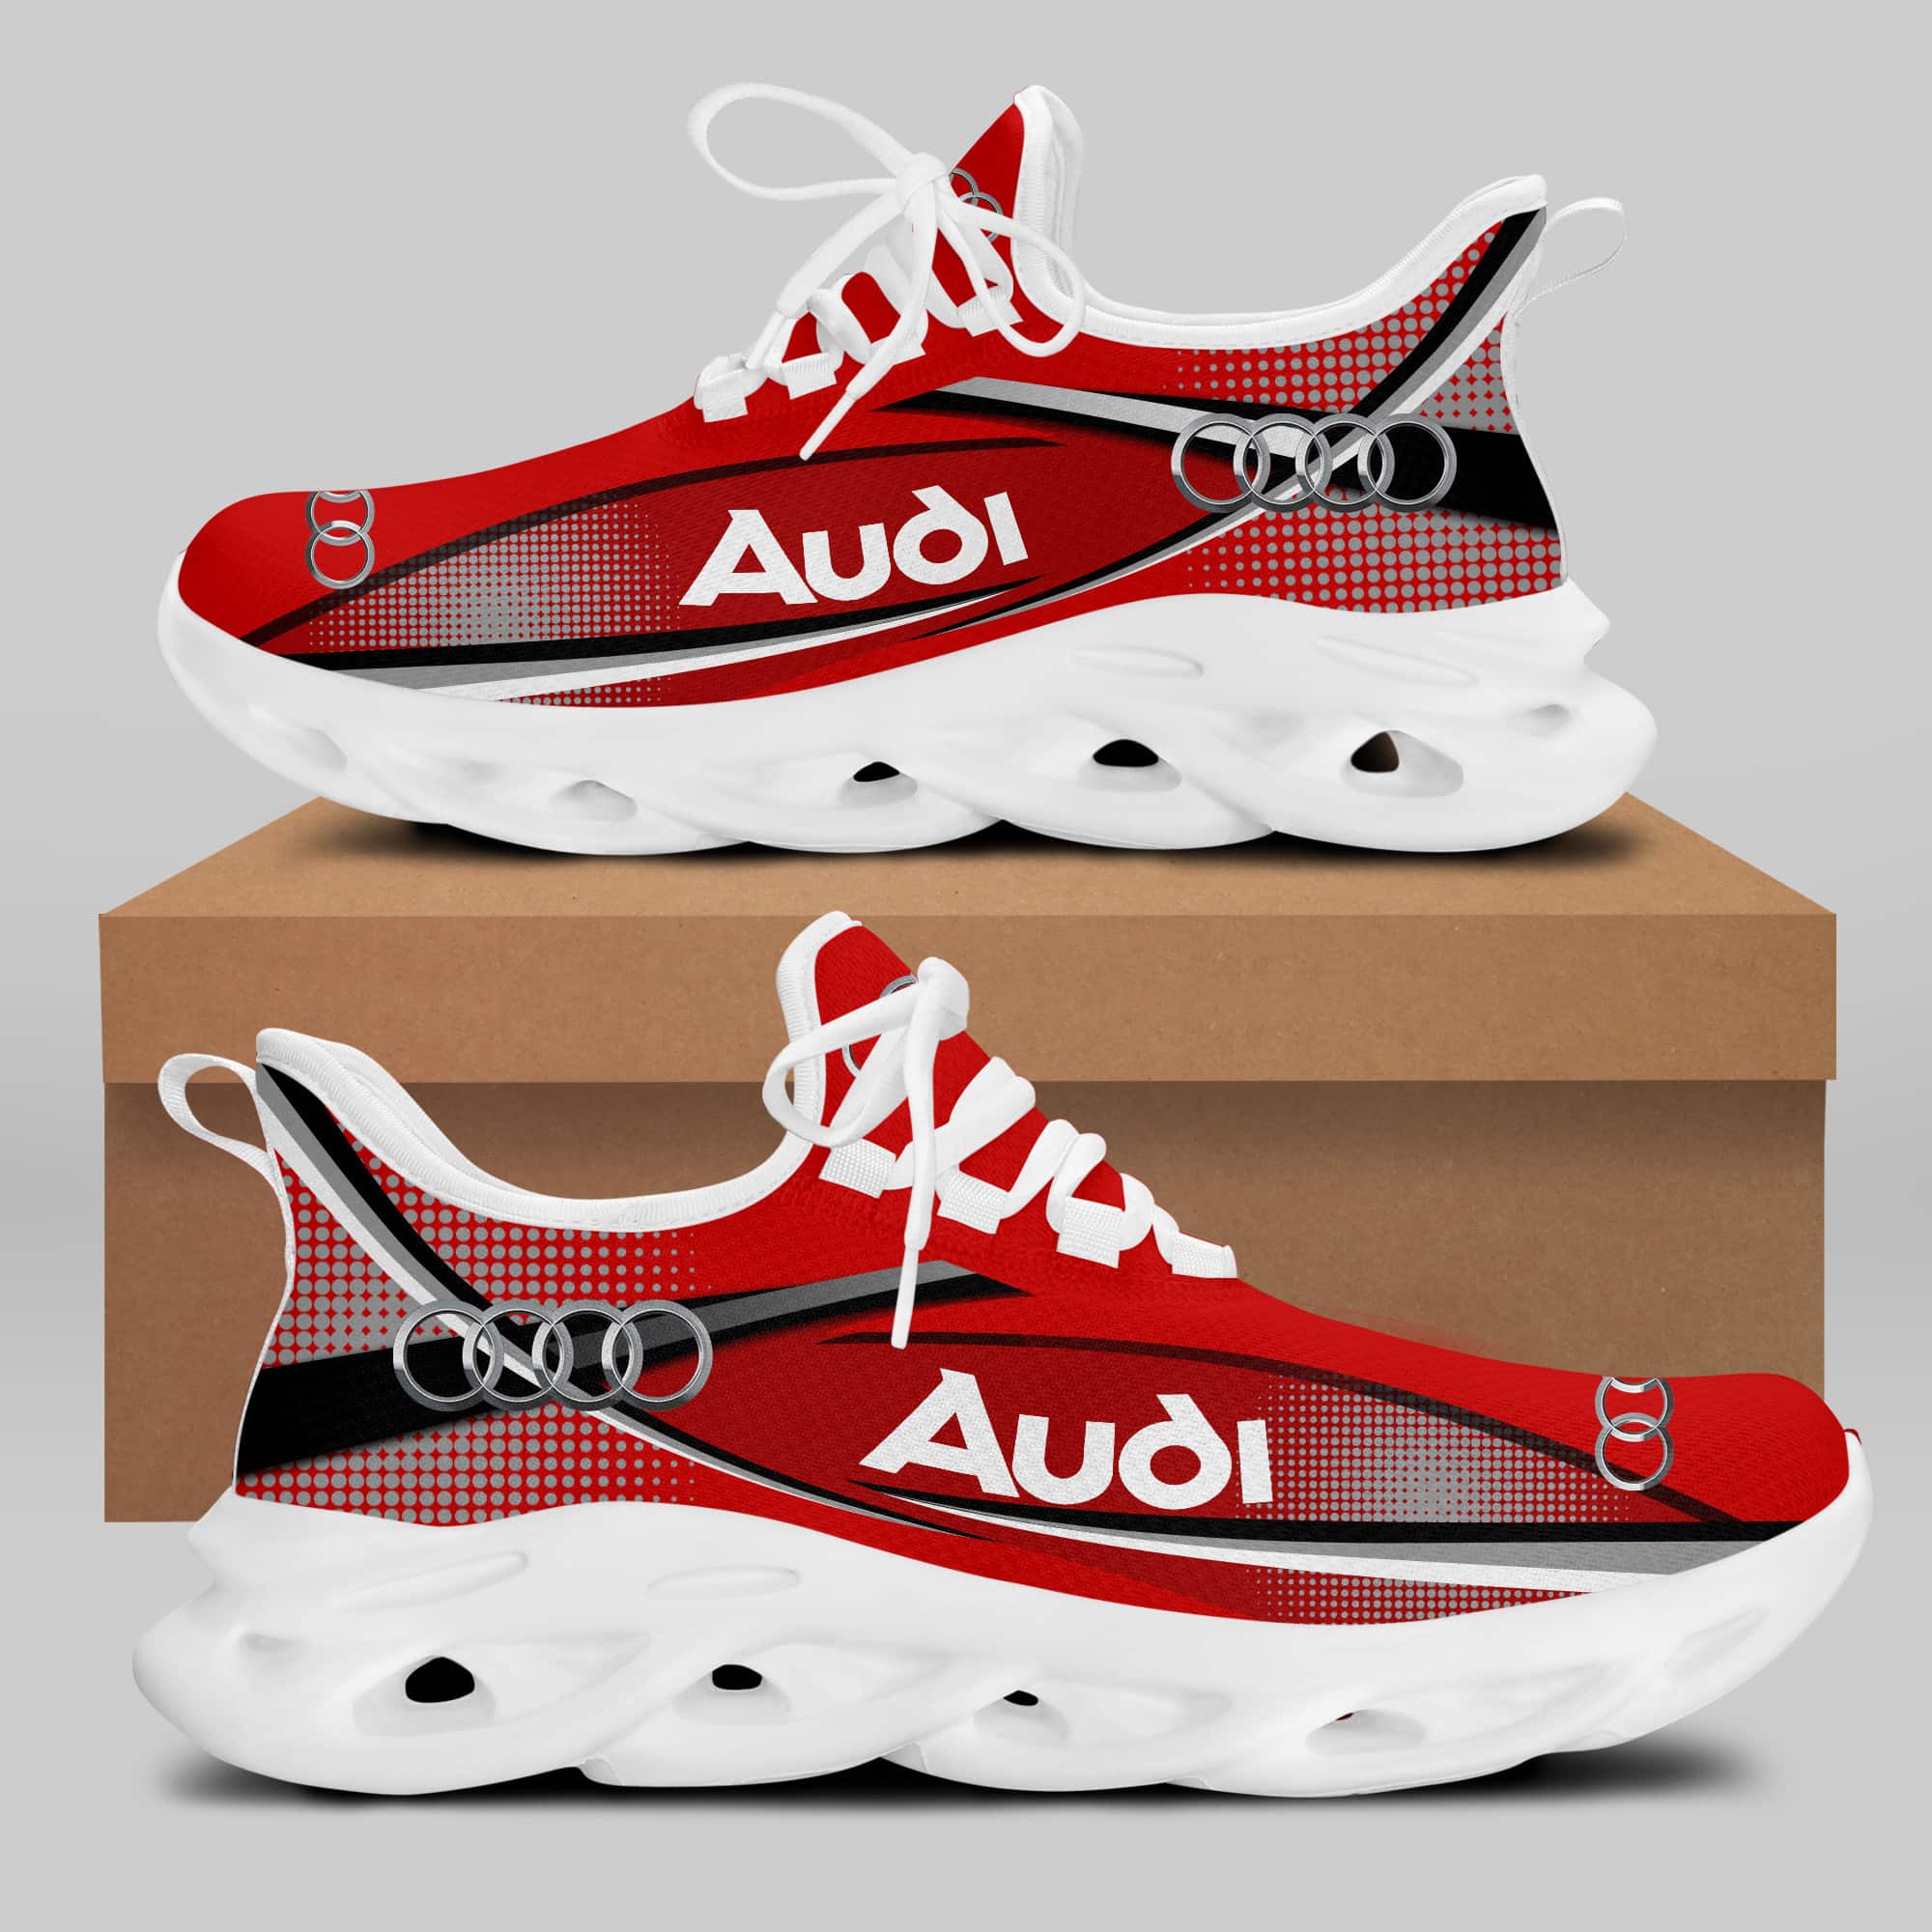 Audi Sport Running Shoes Max Soul Shoes Sneakers Ver 52 2